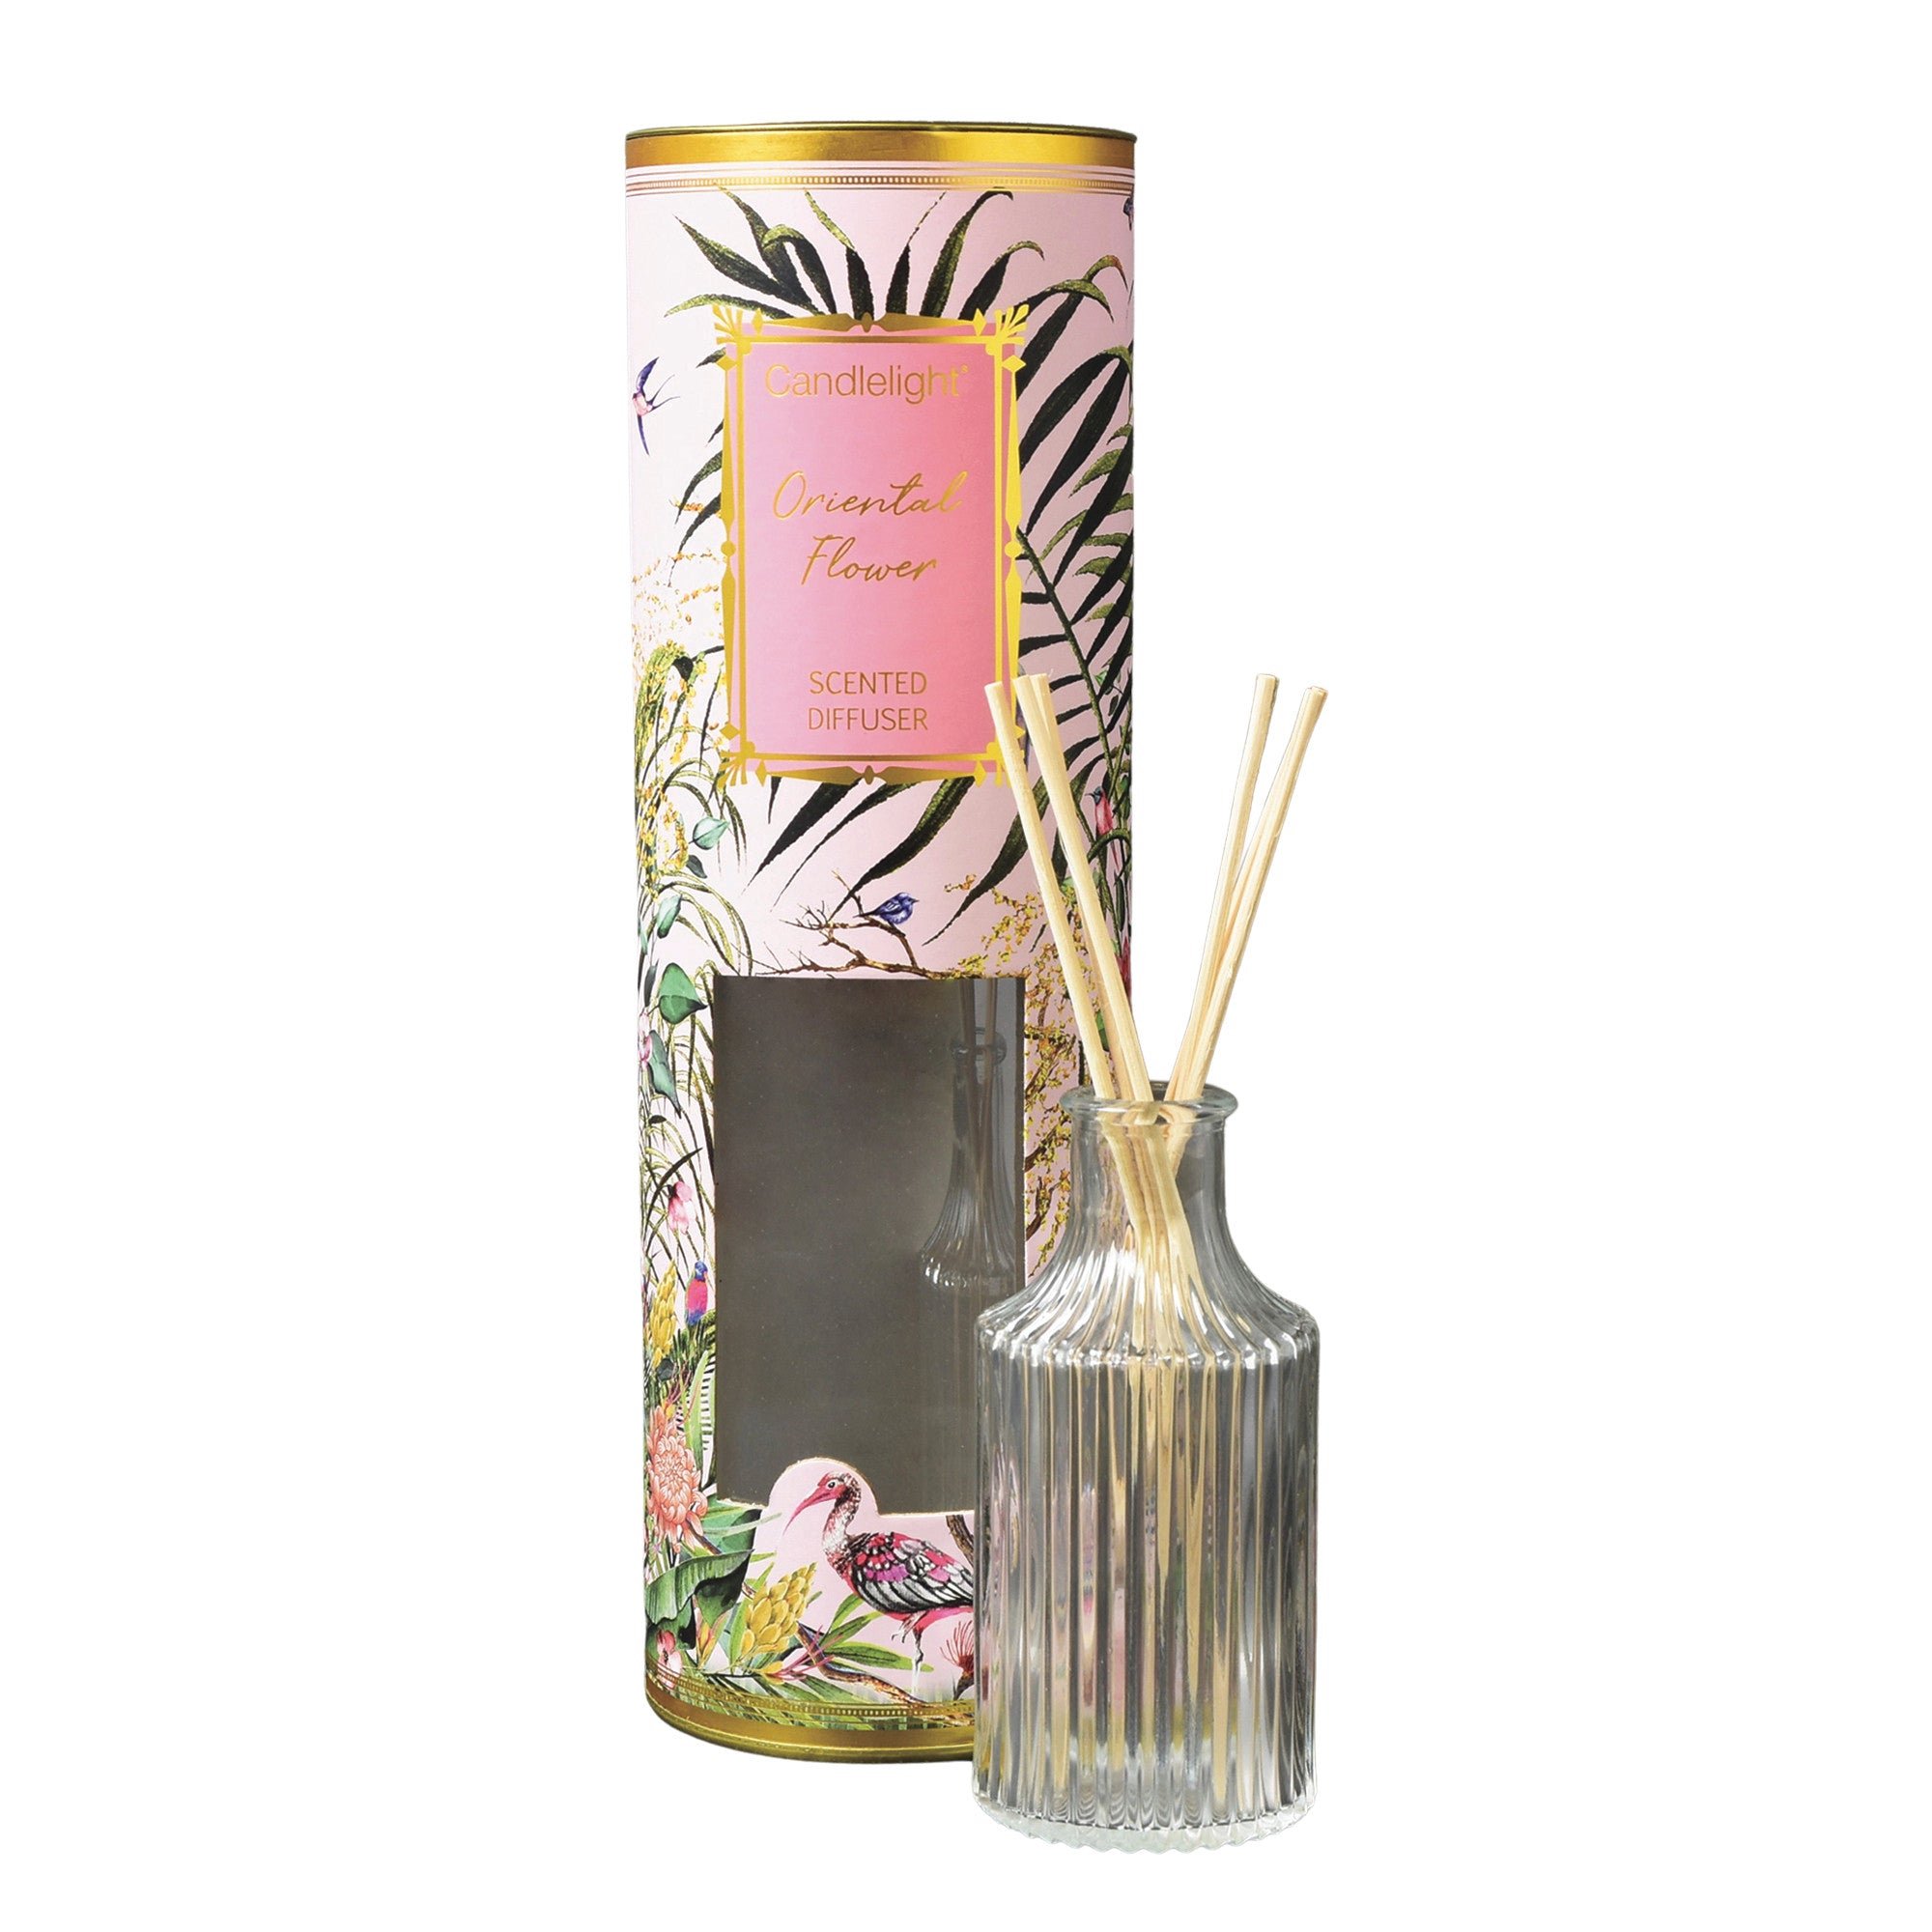 Oriental Flower Scent Reed Diffuser